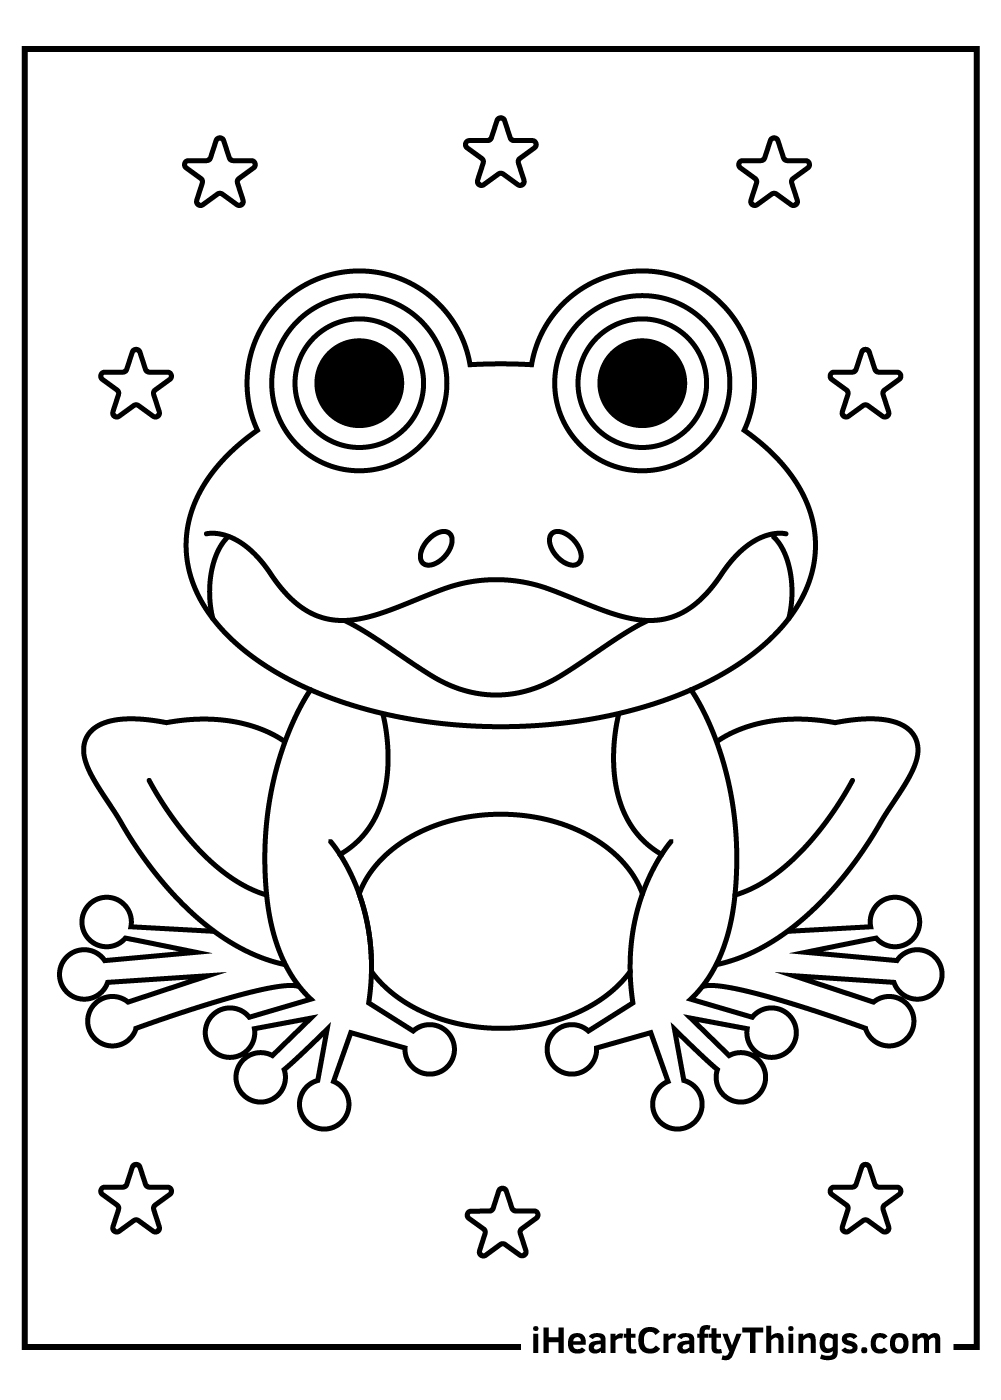 Frog coloring pages free printables